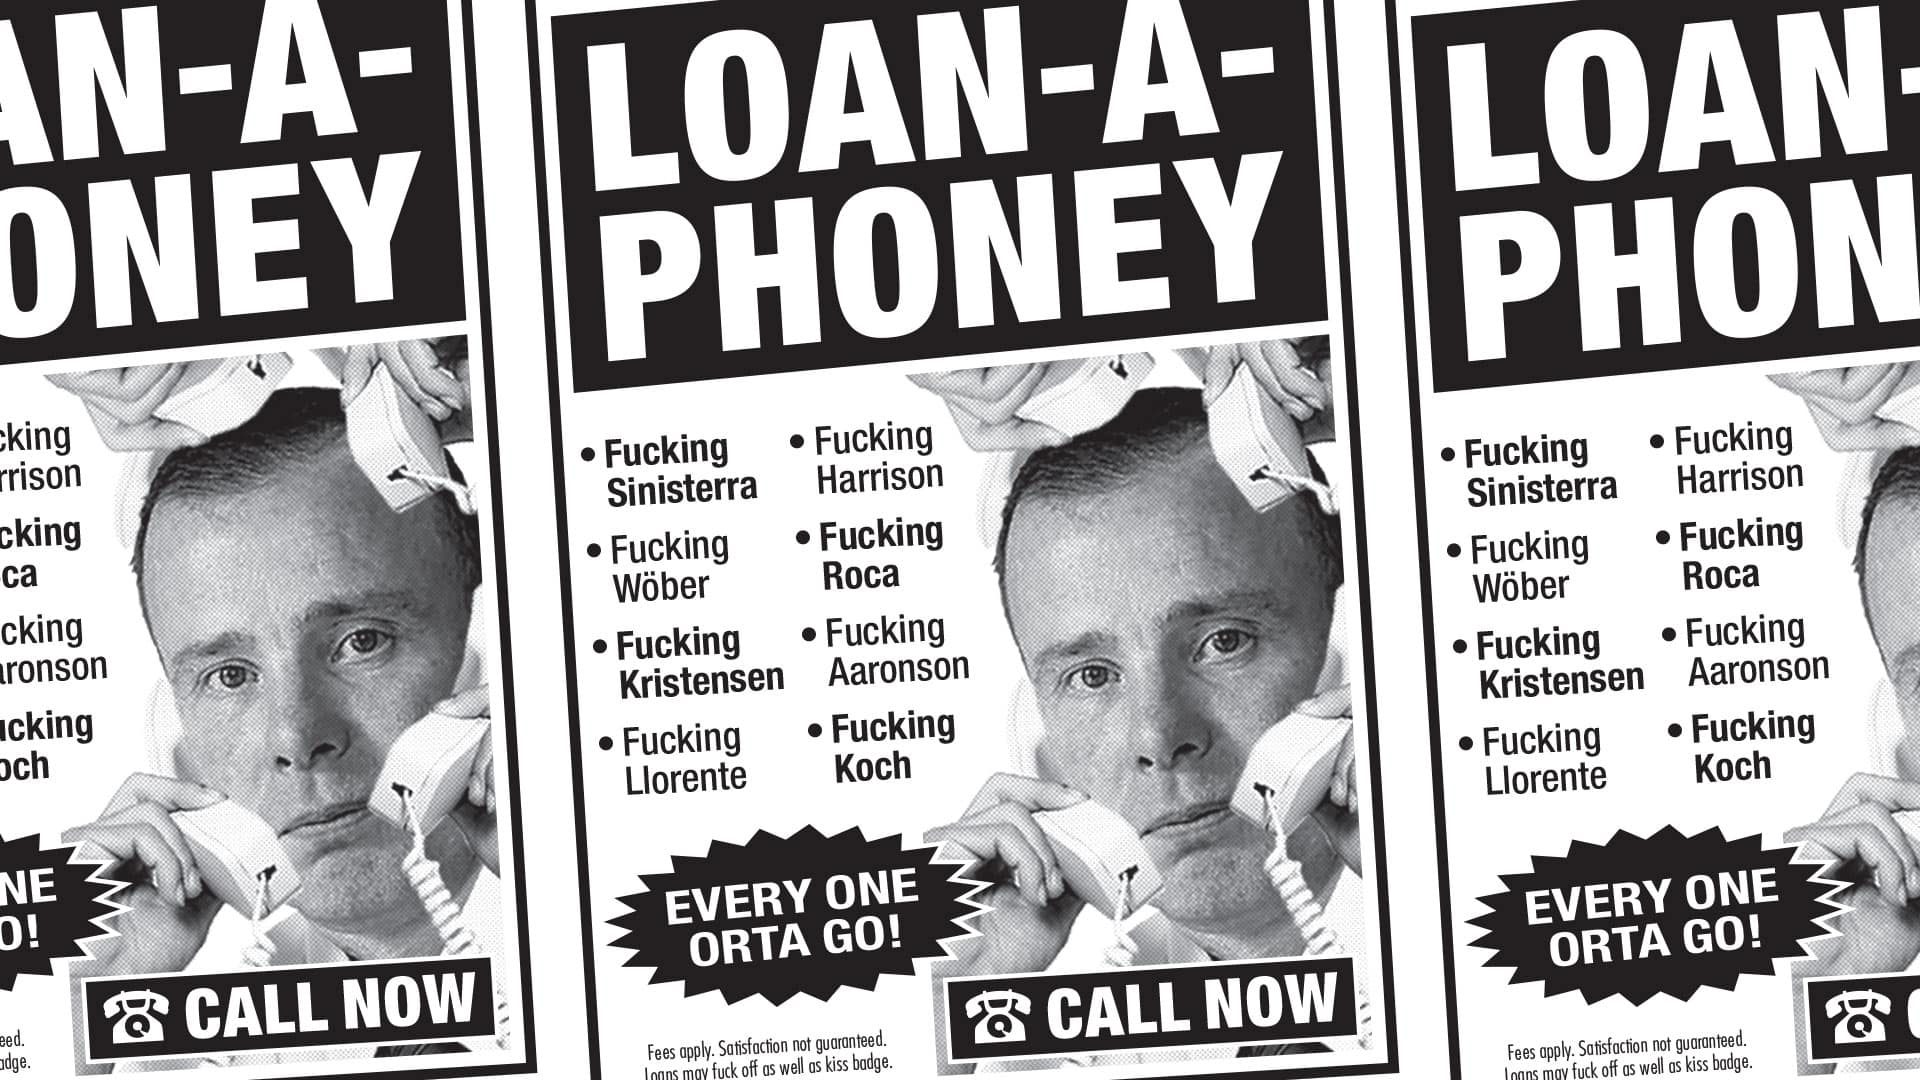 'LOAN-A-PHONEY' is the headline on an old school magazine advert featuring Angus Kinnear holding a phone to his ears and the names of 'Fucking Sinisterra', 'Fucking Wober', 'Fucking Kristensen' etc. Every One Orta Go!